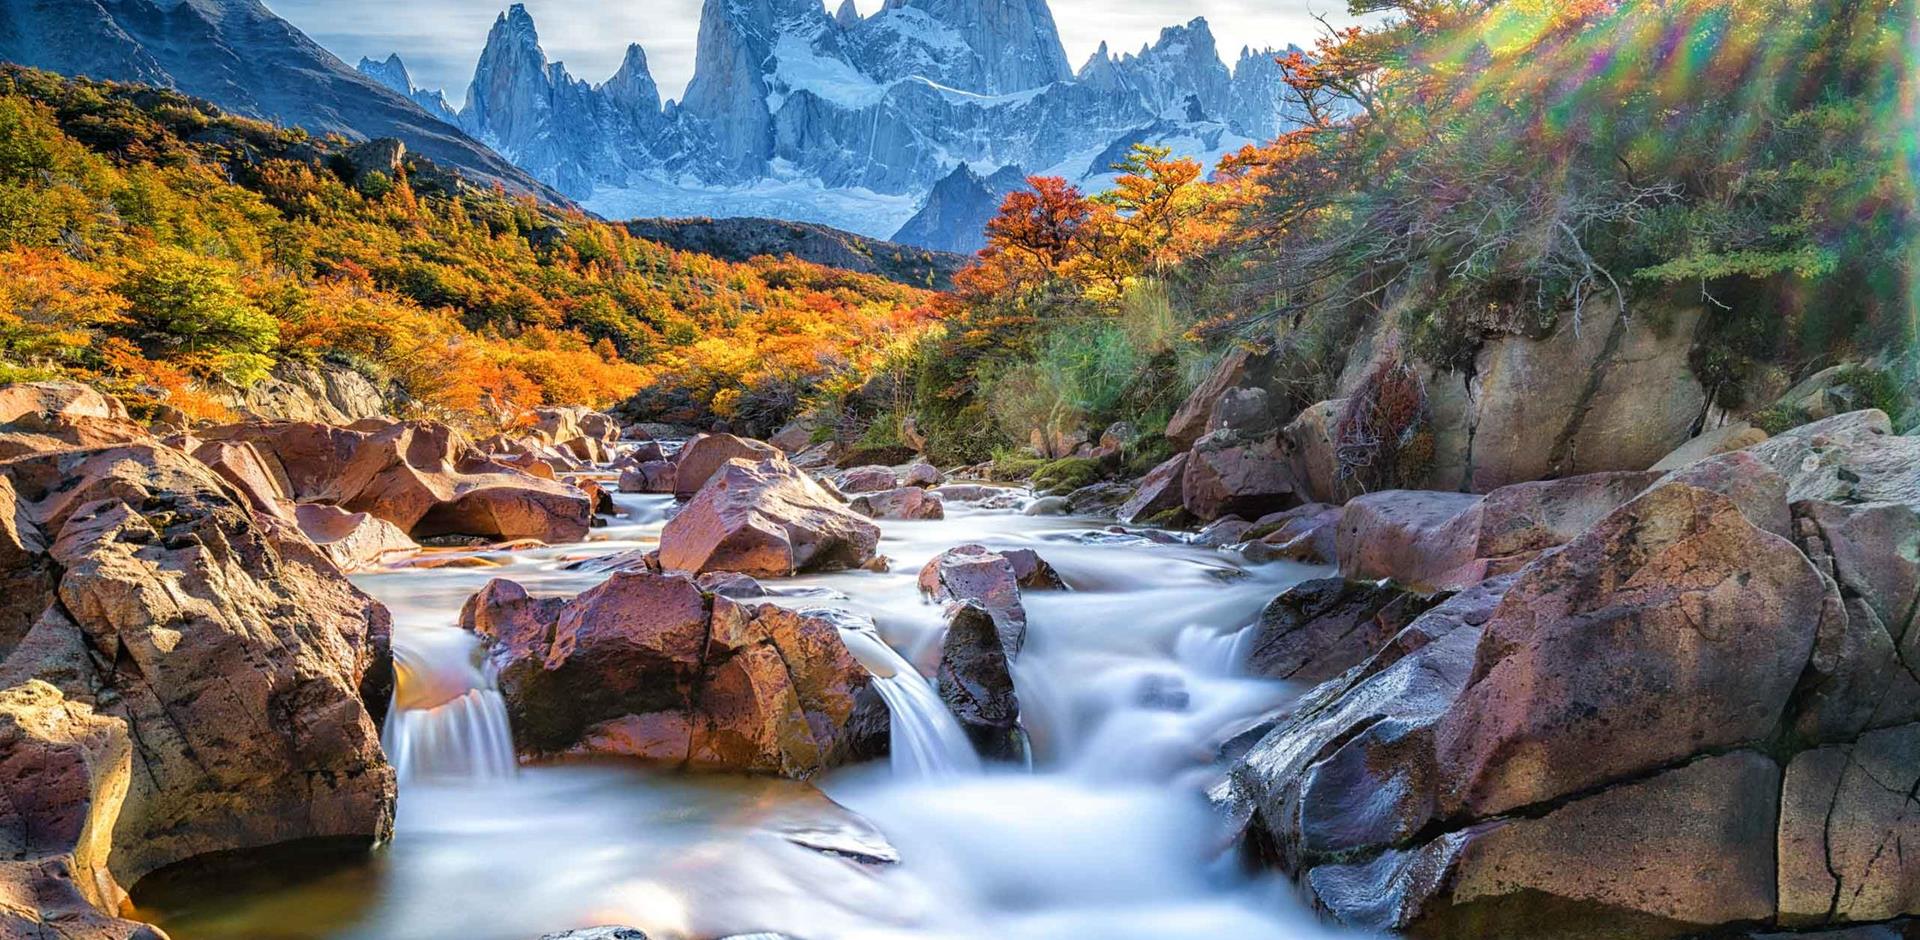 A&K Itinerary: Trekking in Patagonia, Argentina